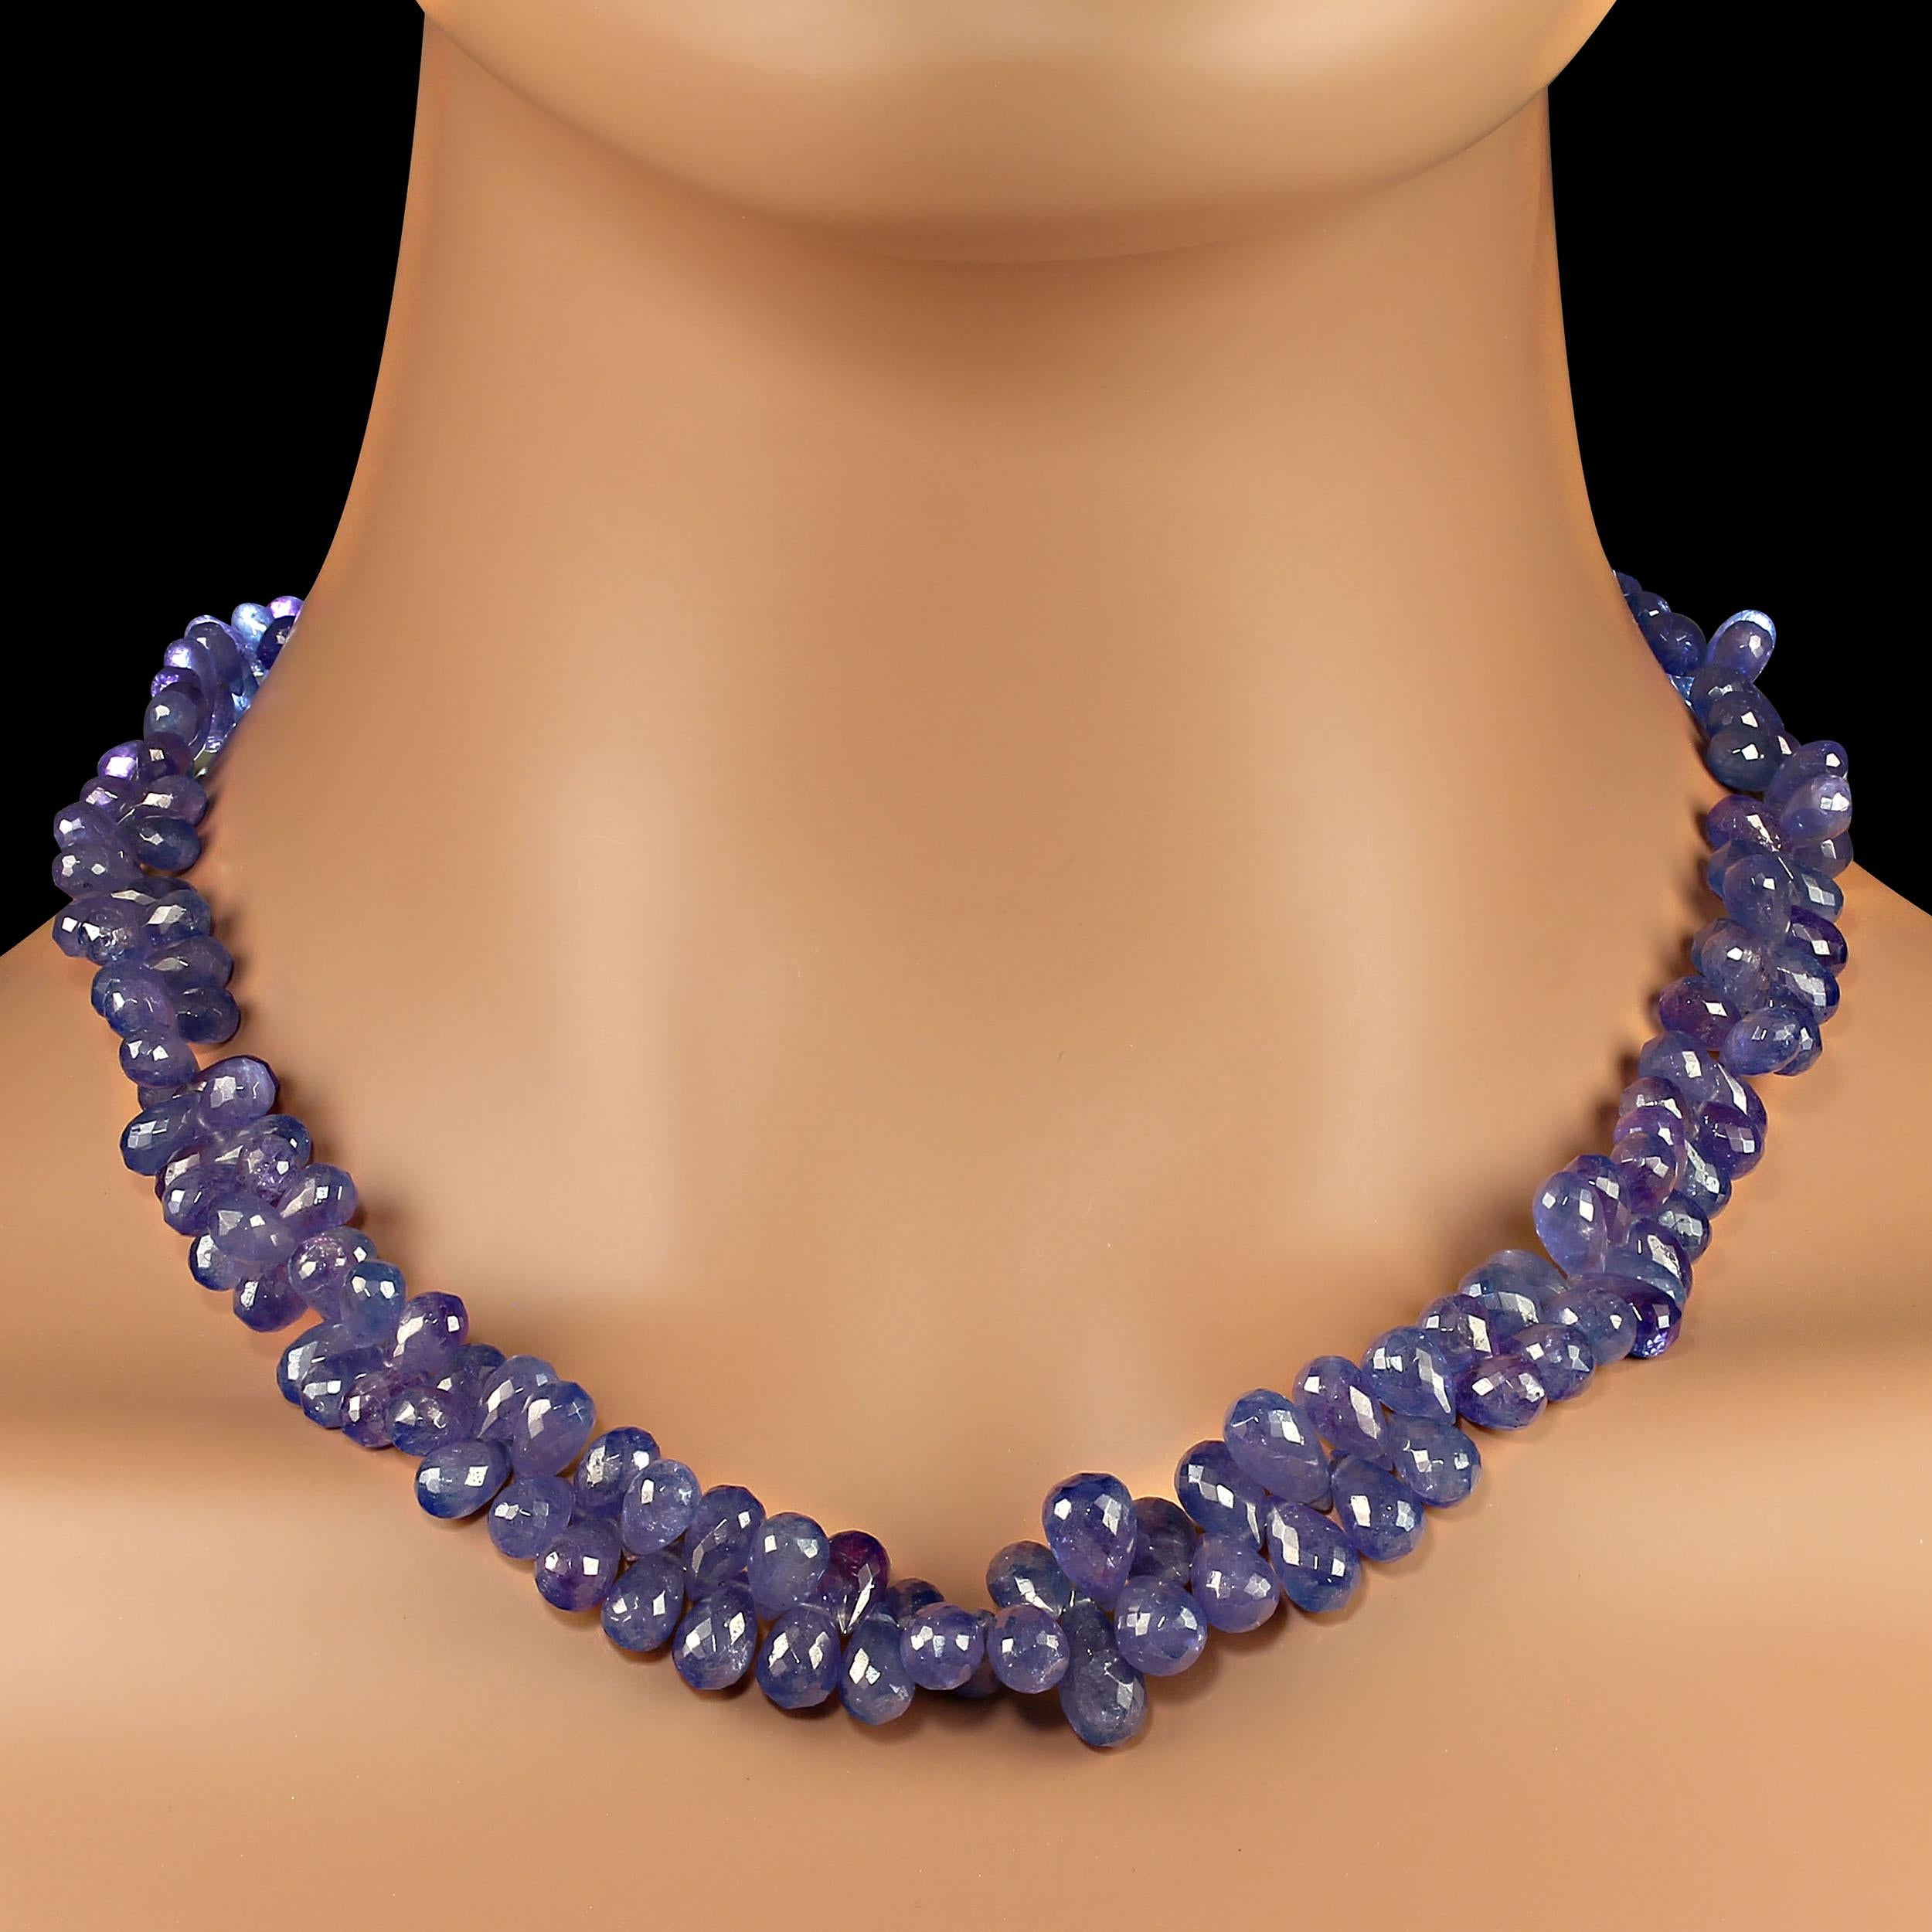 19 Inch gorgeous tanzanite necklace in blue-purple faceted briolettes.  This necklace graduates, 6-12mm in the sparkling briolettes that dance in the light.  It will hug your neckline and enhance all skintones.  Wear this to all your holiday